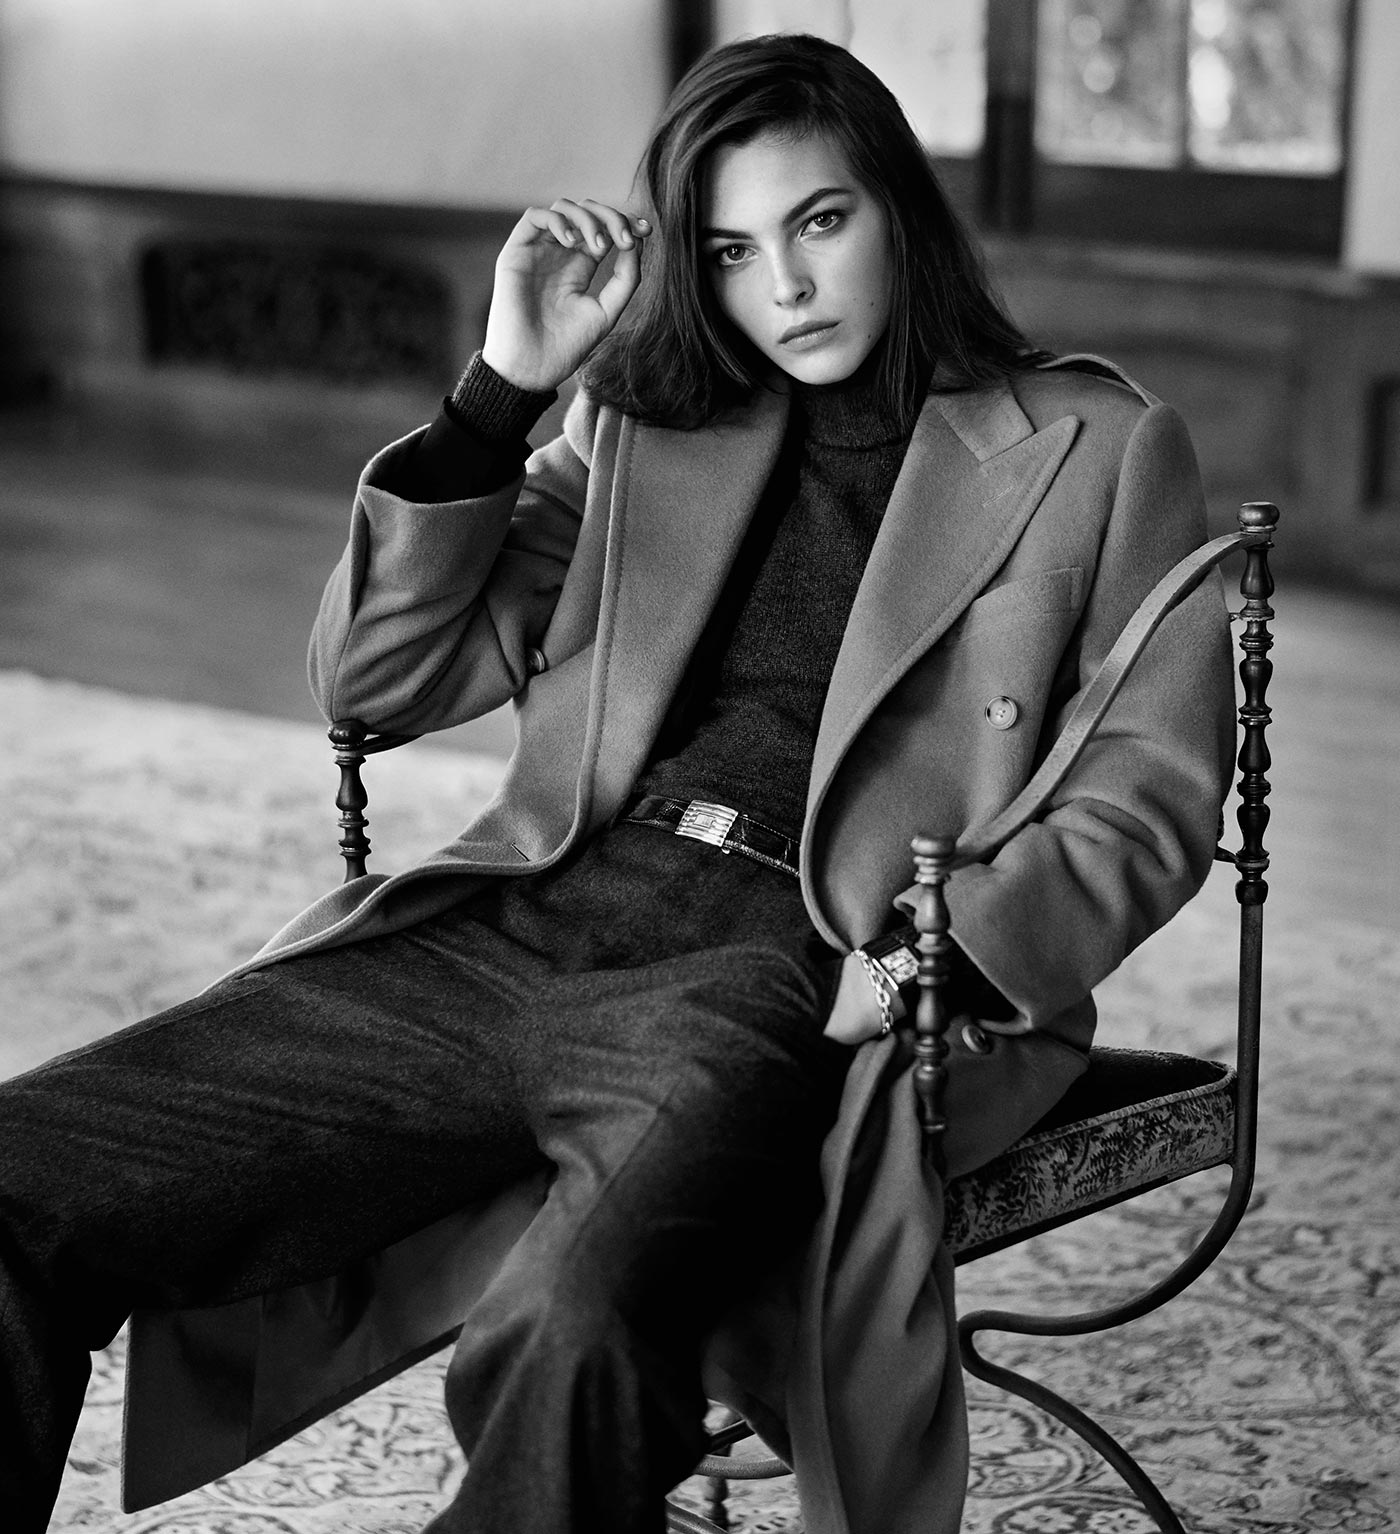 The British Warmer, worn by Vittoria Ceretti. Photographed by Steven Meisel